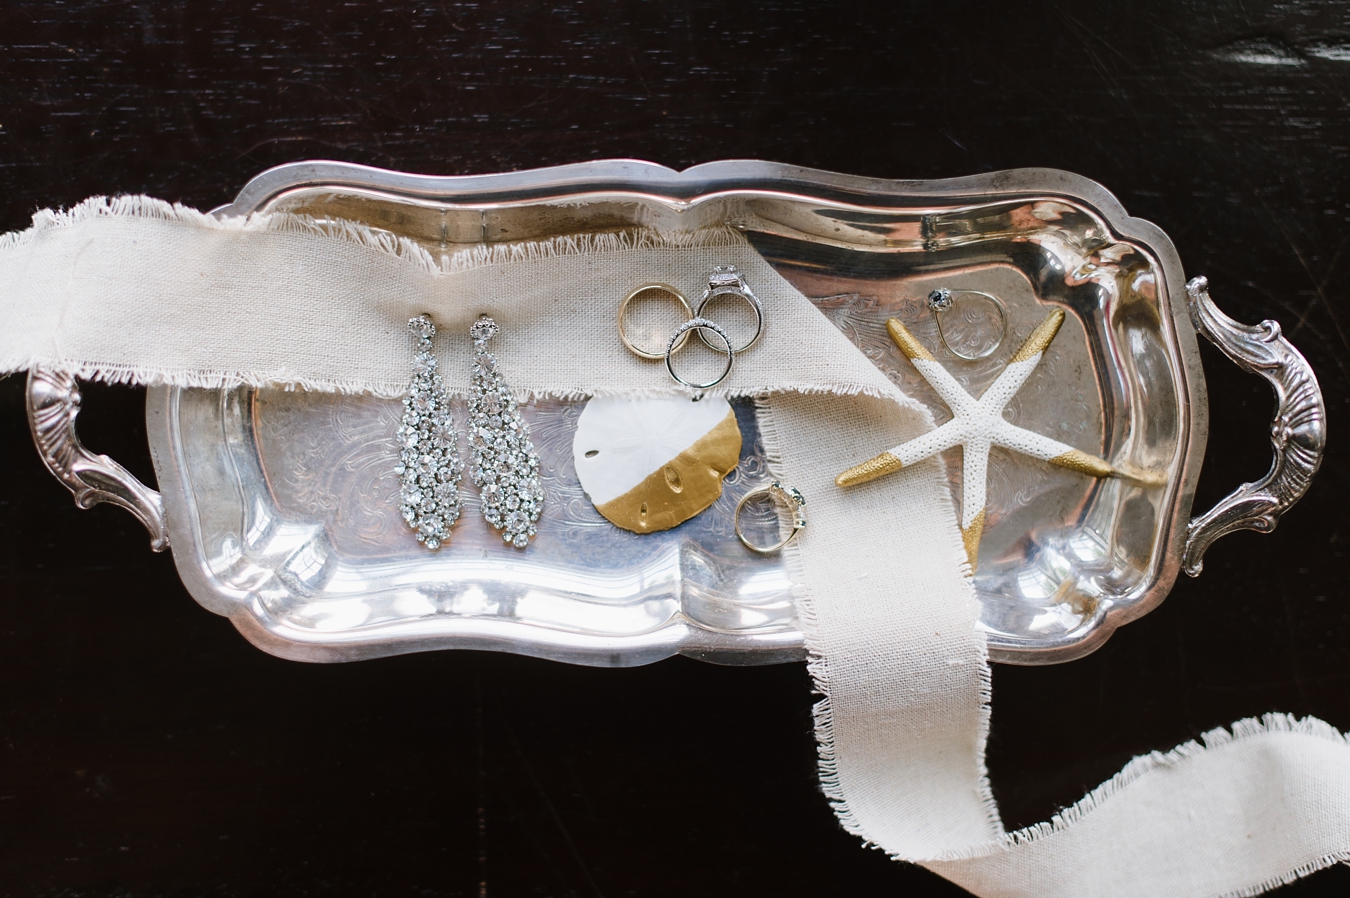 Styled Wedding Details with Gold Starfish and Sand Dollars